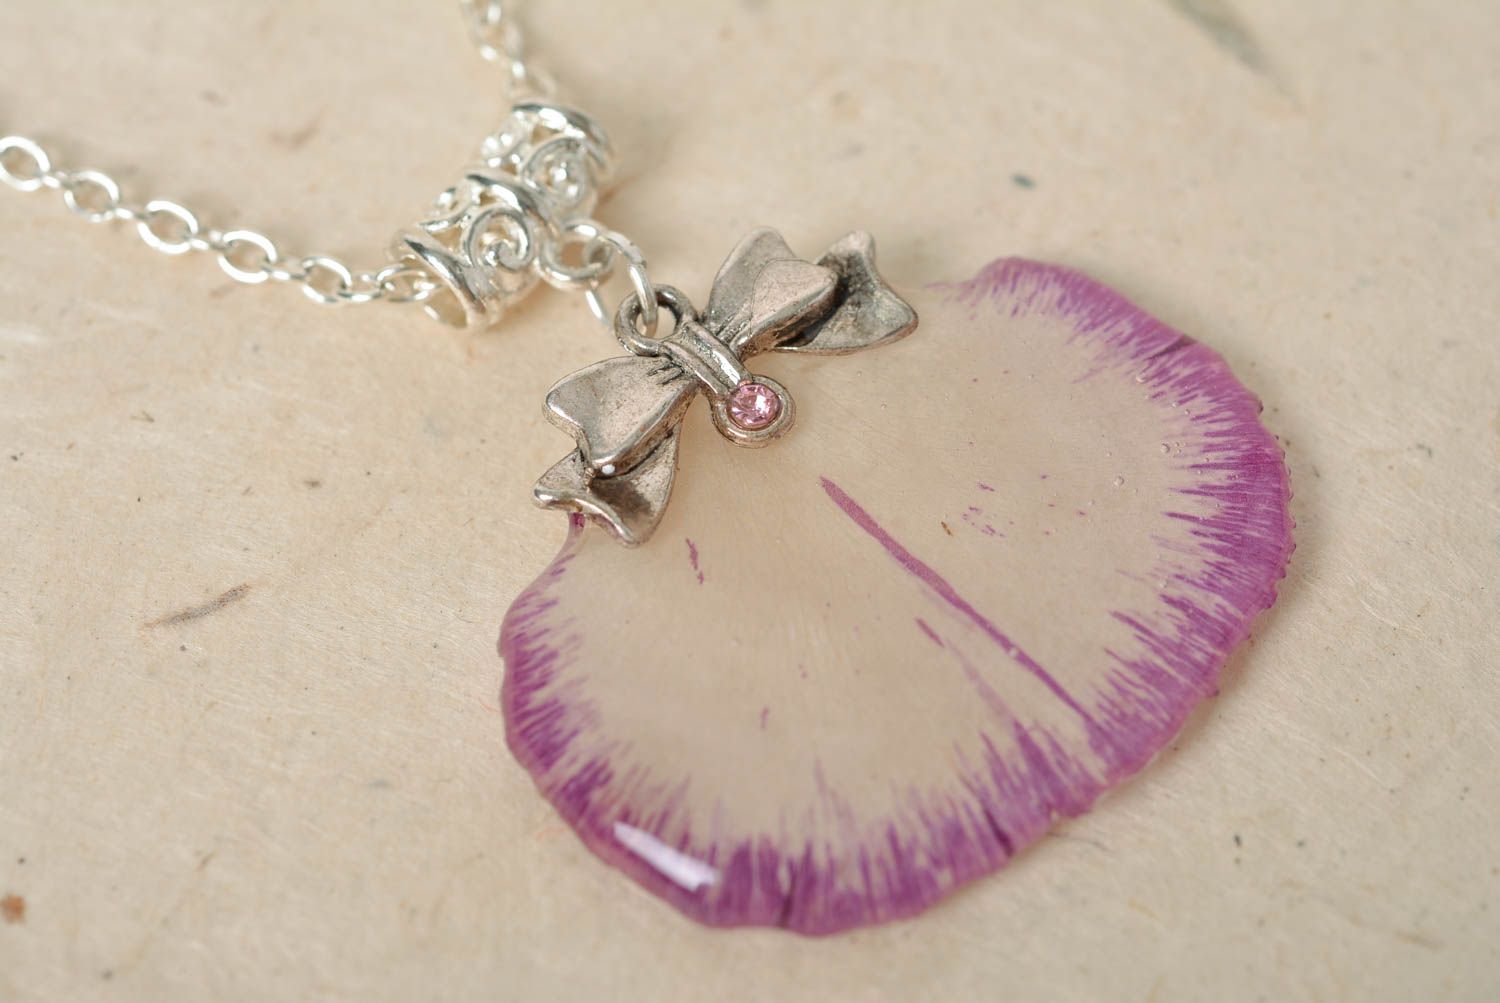 Handmade gentle pendant necklace with dried flowers and epoxy coating on chain photo 3